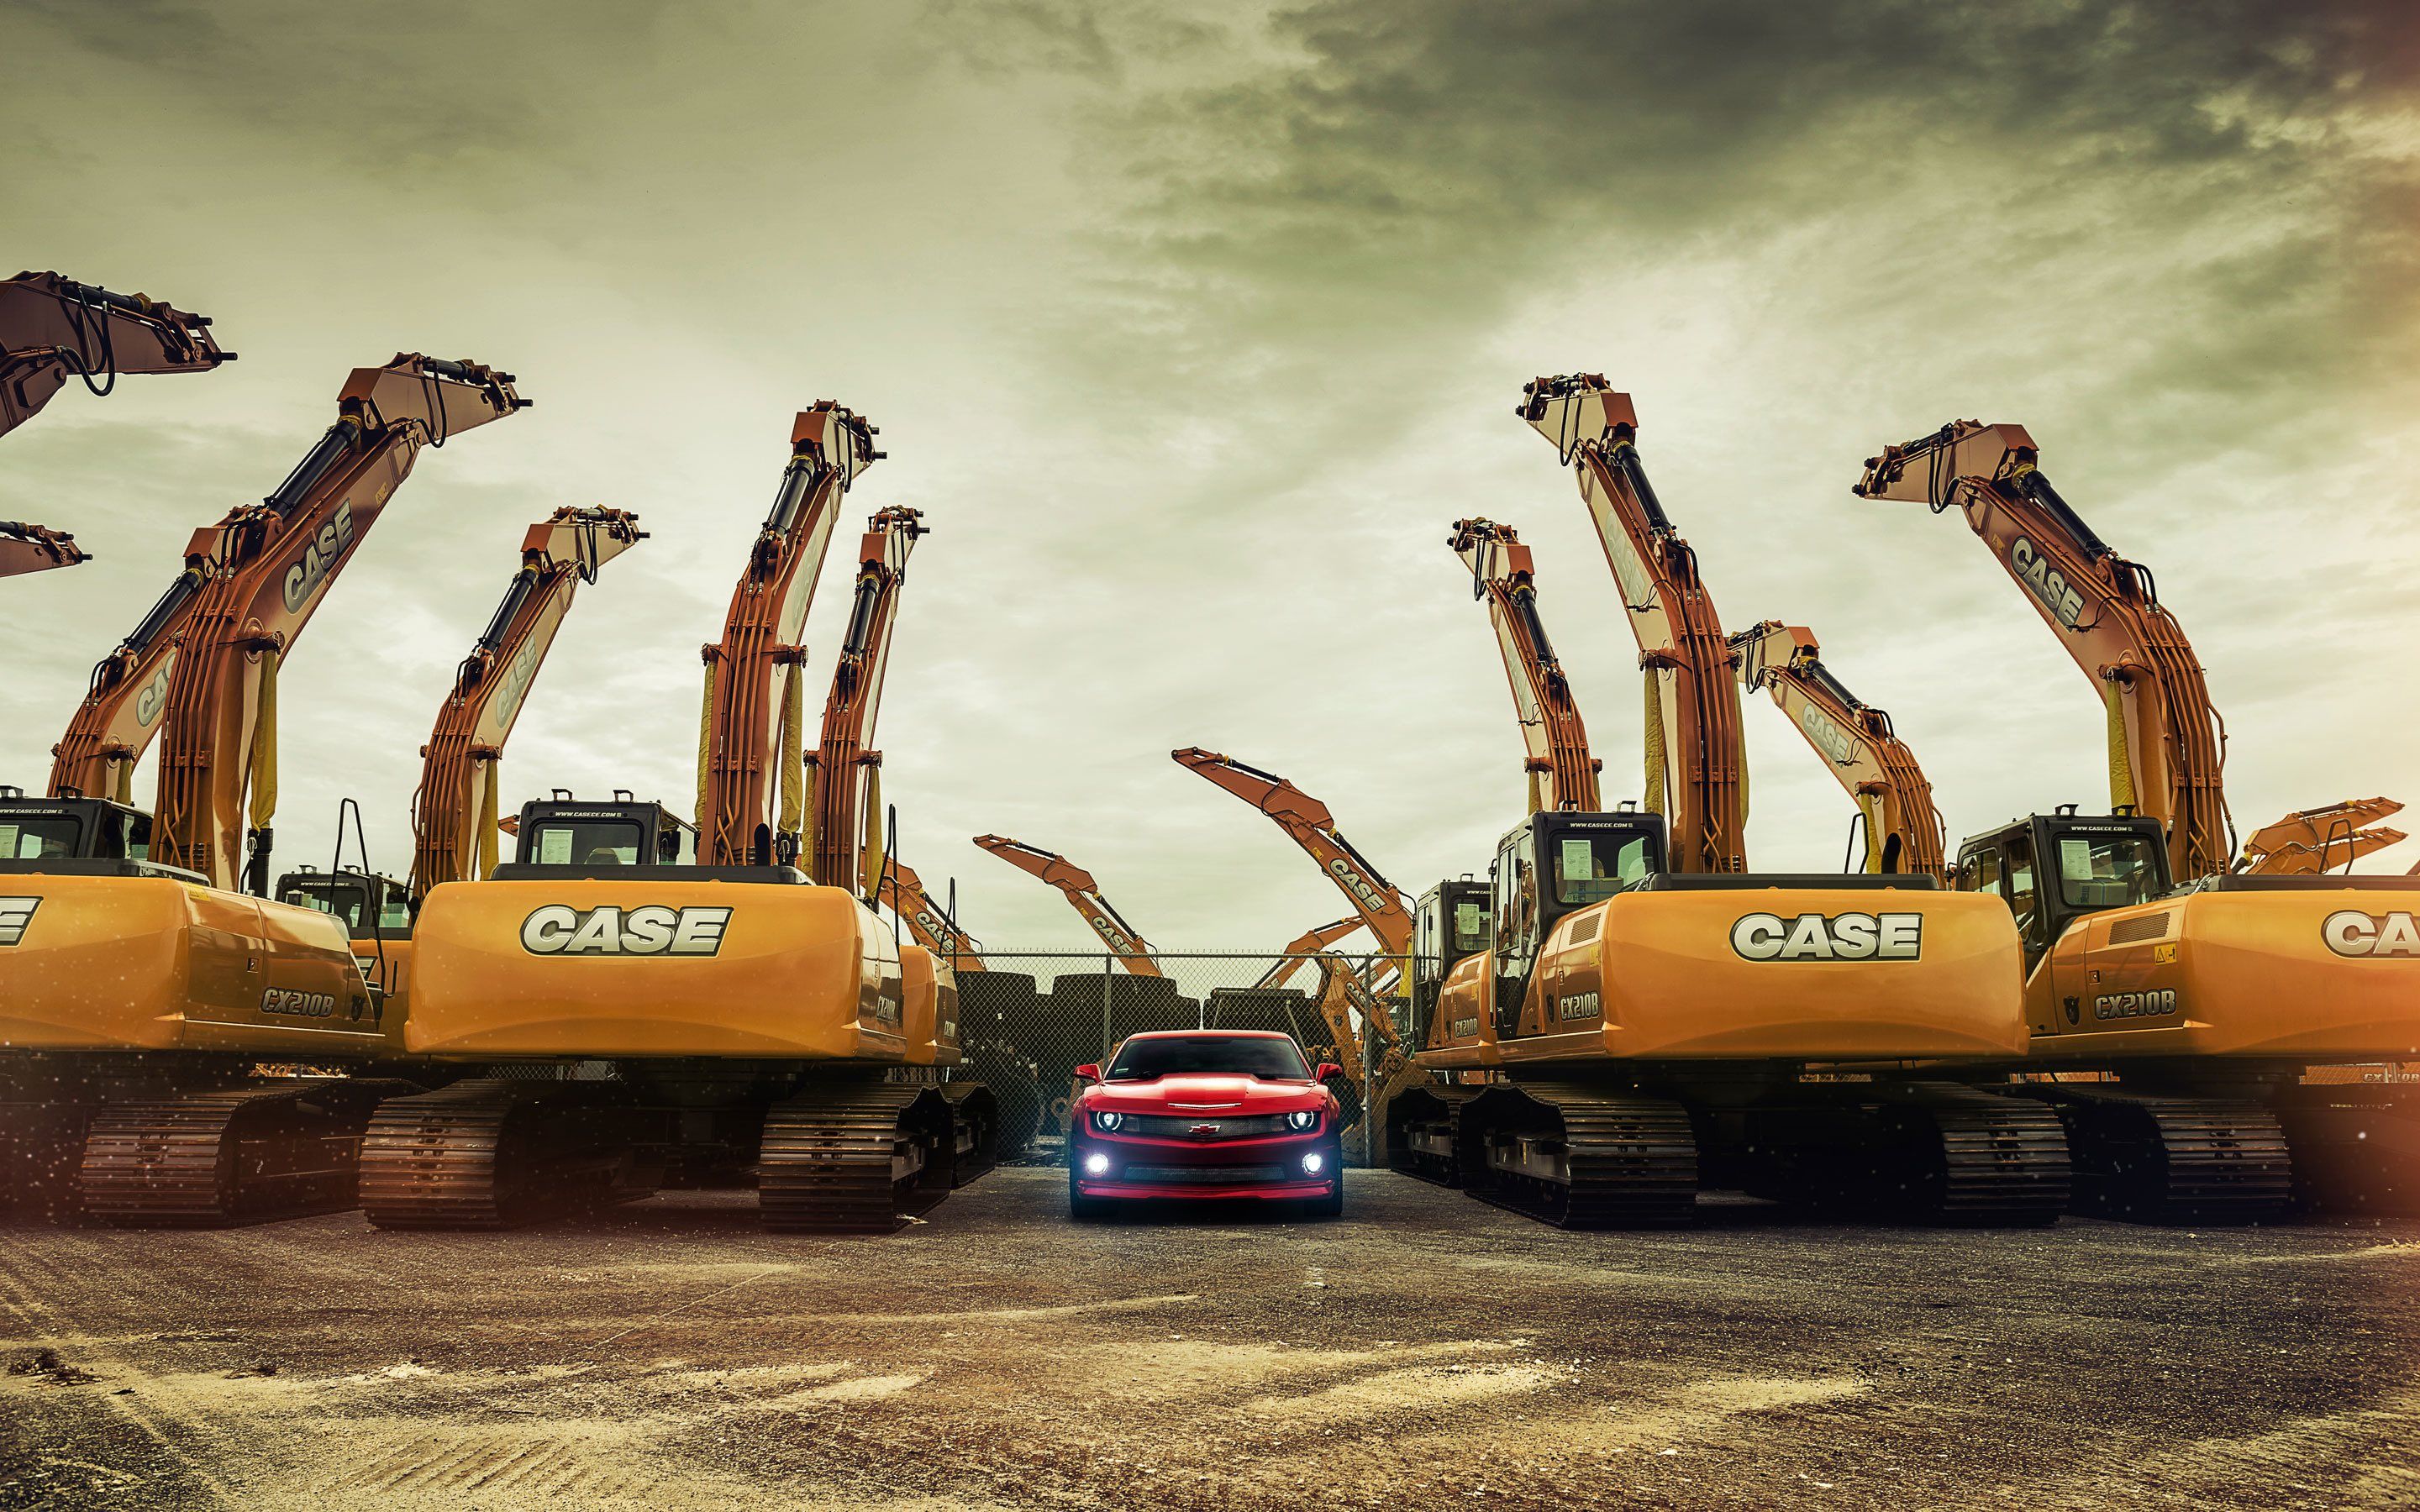 Download wallpaper Case CX210B, hydraulic excavator, construction machinery, Chevrolet Camaro for desktop with resolution 2880x1800. High Quality HD picture wallpaper